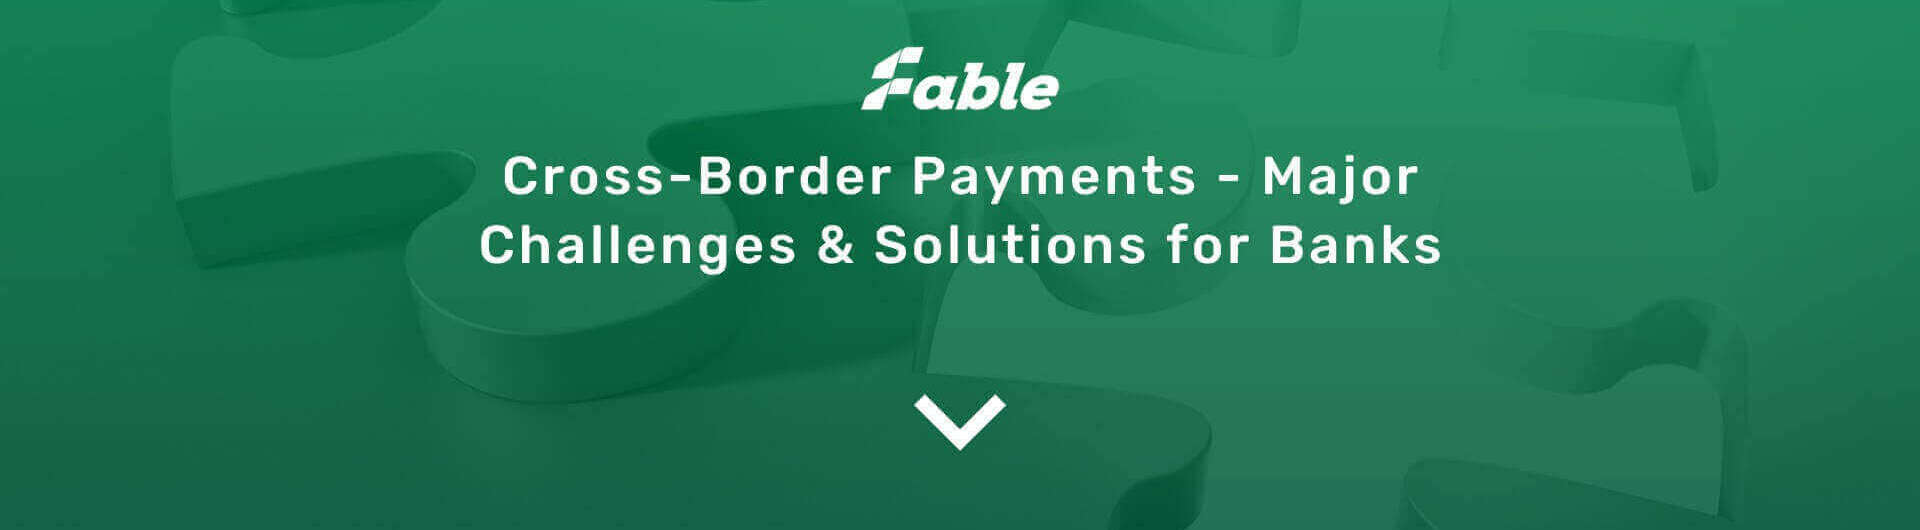 Cross-Border Payments - Major Challenges & Solutions for Banks